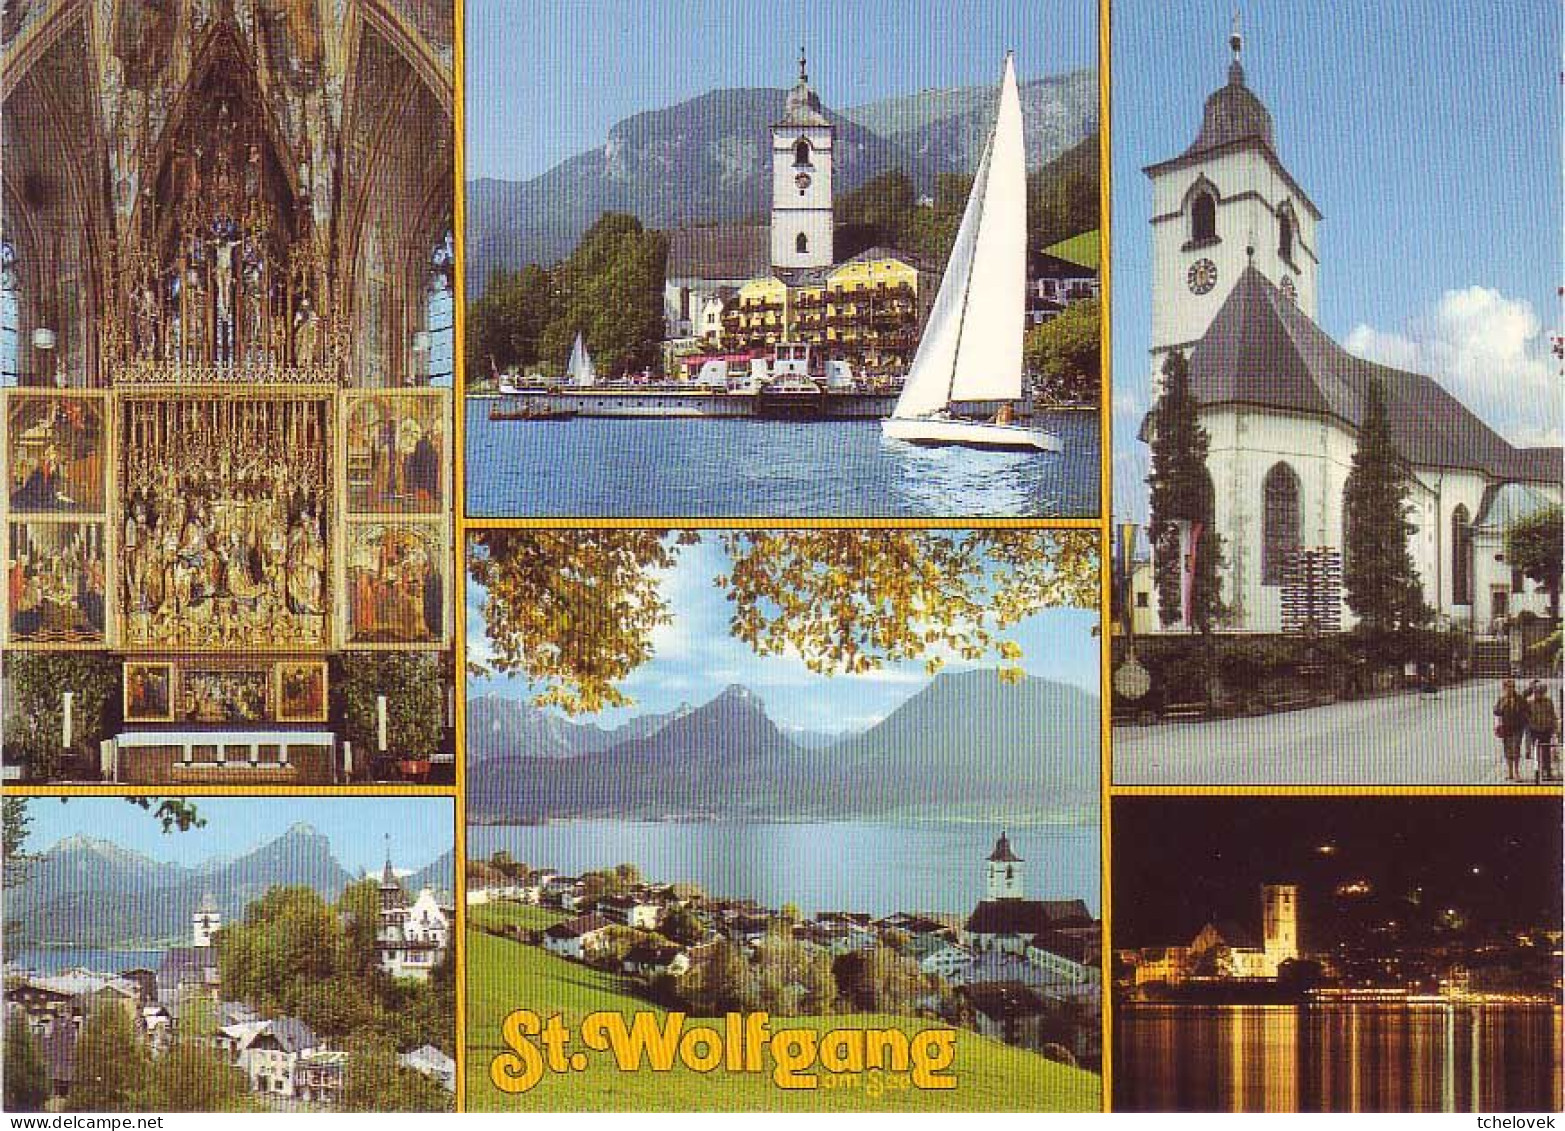 (99). Autriche. Oesterreich. 7 Cp. Haute Autriche. St Wolfgang. 54 & (3) & A 5060 & (2) & 132 & 5360 & (4) - St. Wolfgang